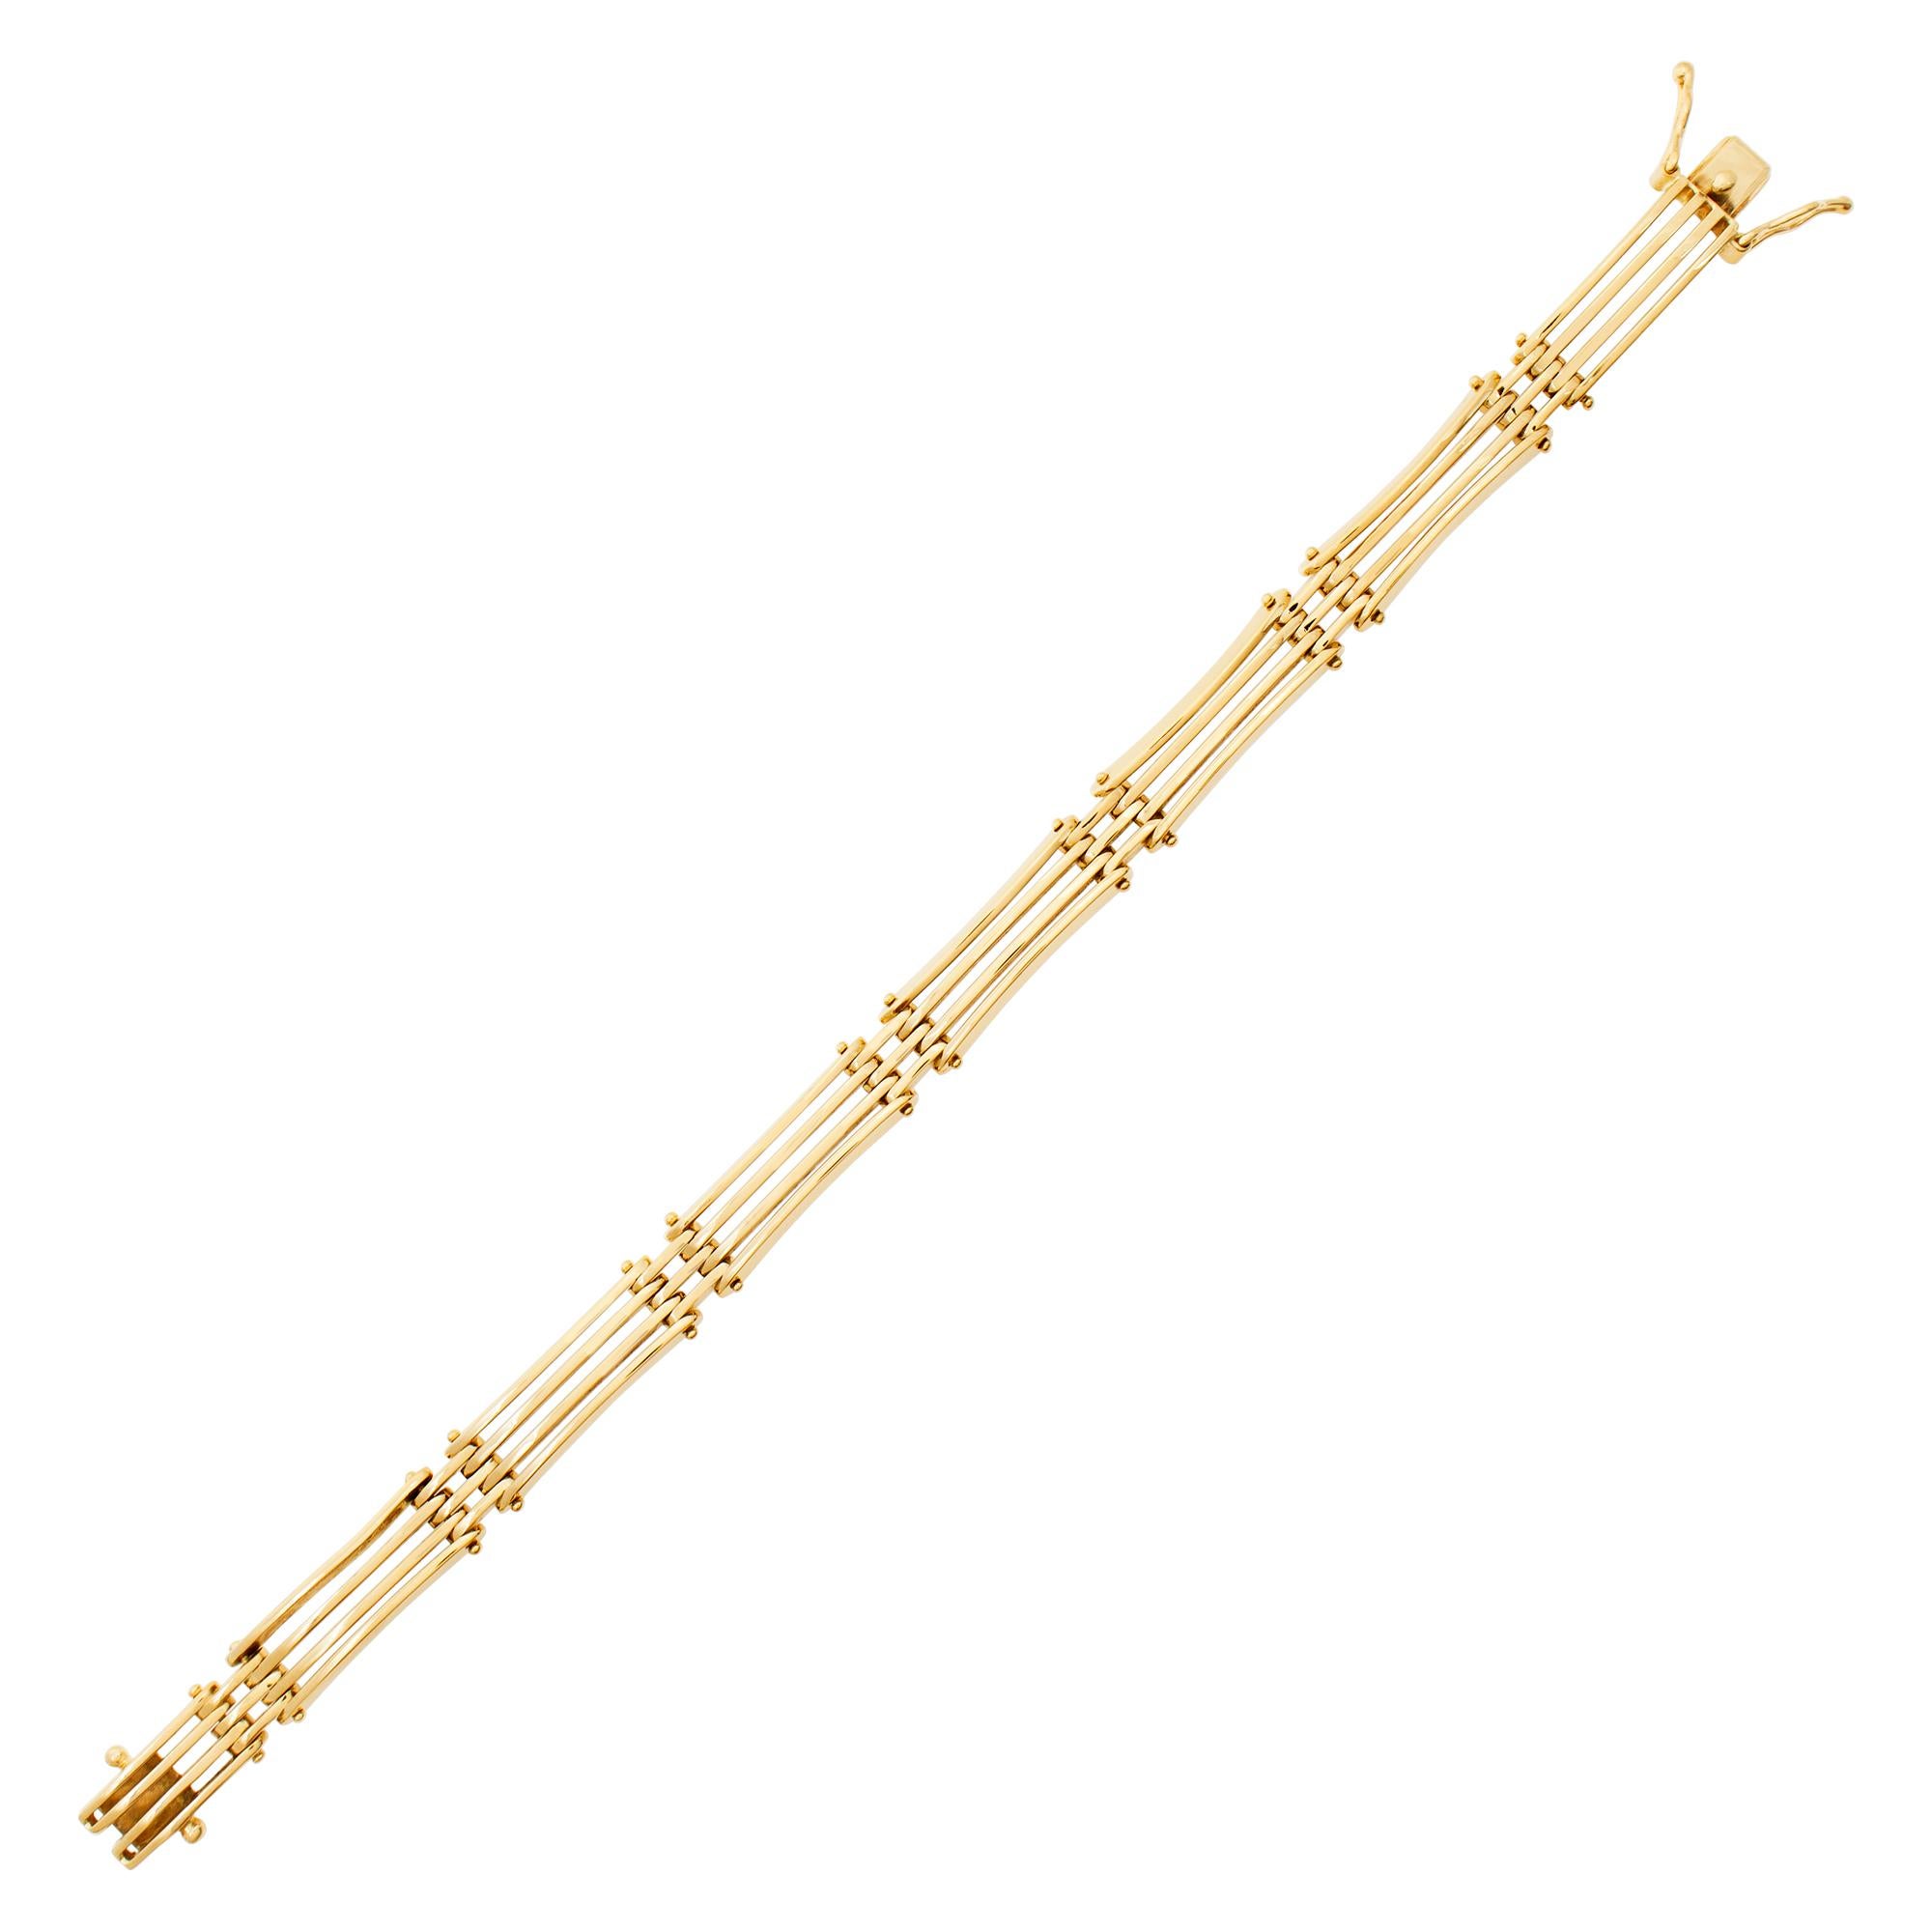 Mechanical link style bracelet in 14k yellow gold. 9